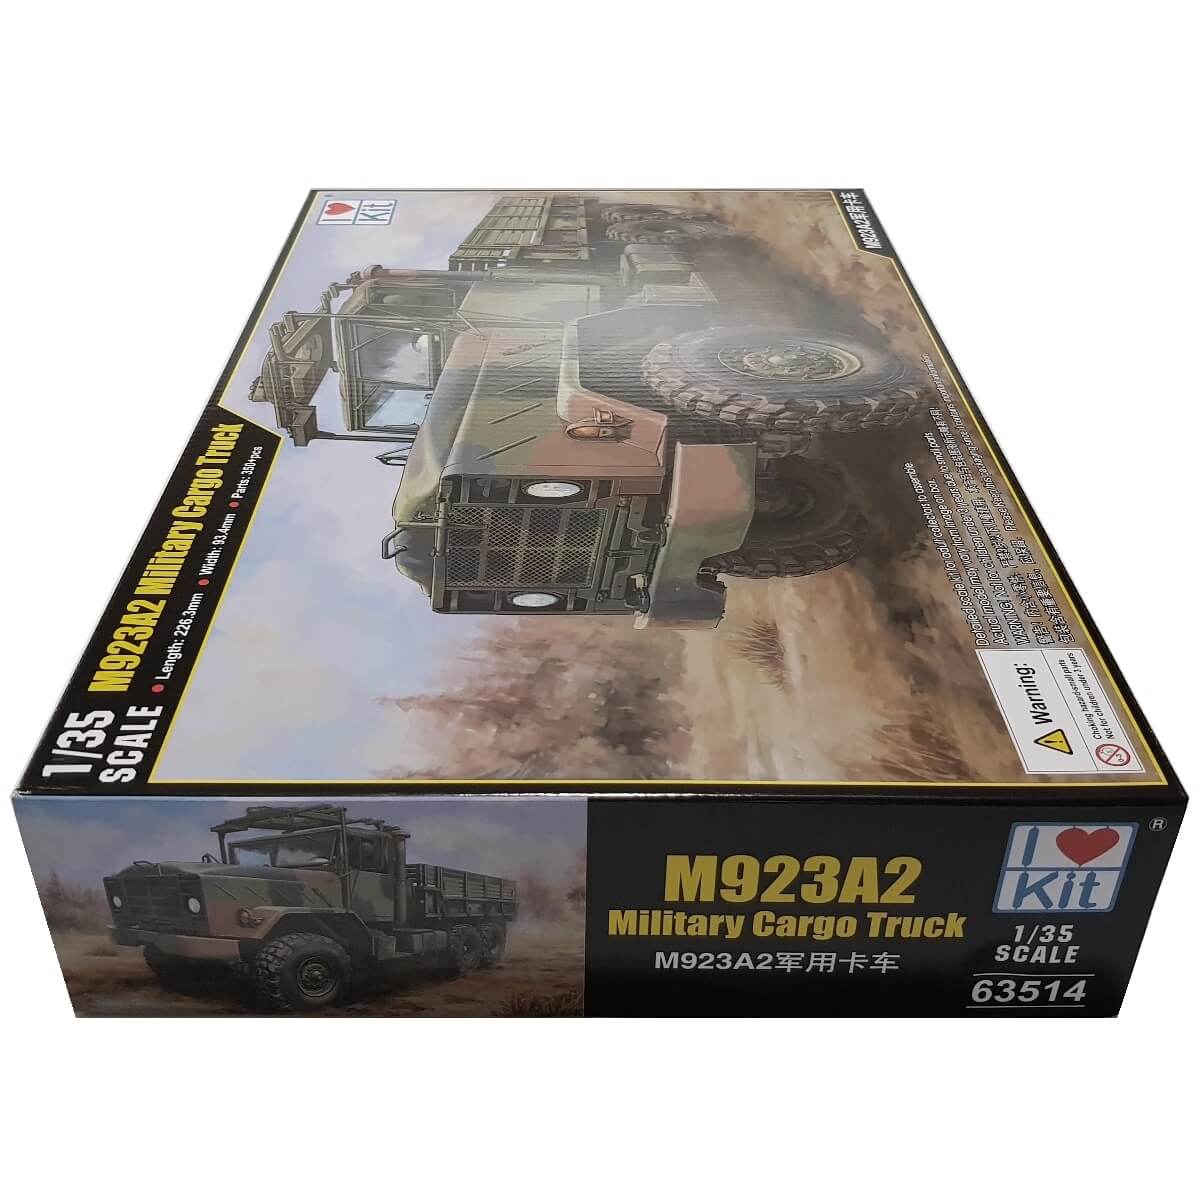 1:35 M923A2 Military Cargo Truck - I LOVE KIT